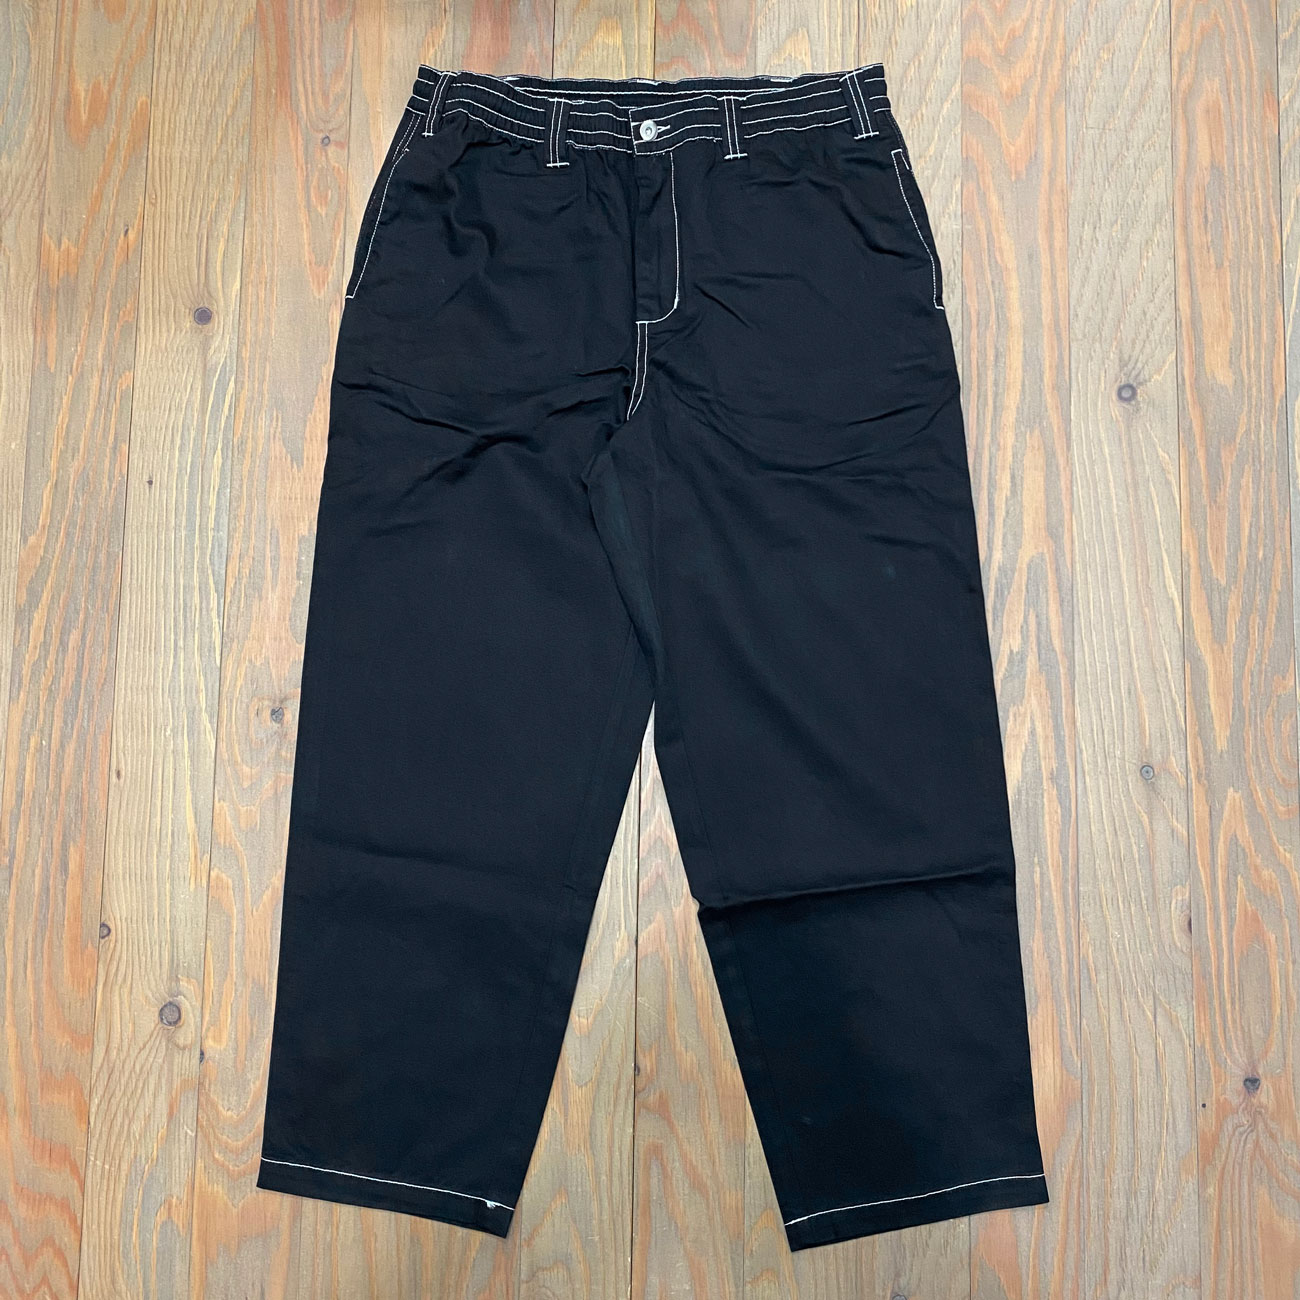 THEORIES STAMP LOUNGE PANTS BLACK CONTRAST STITCH